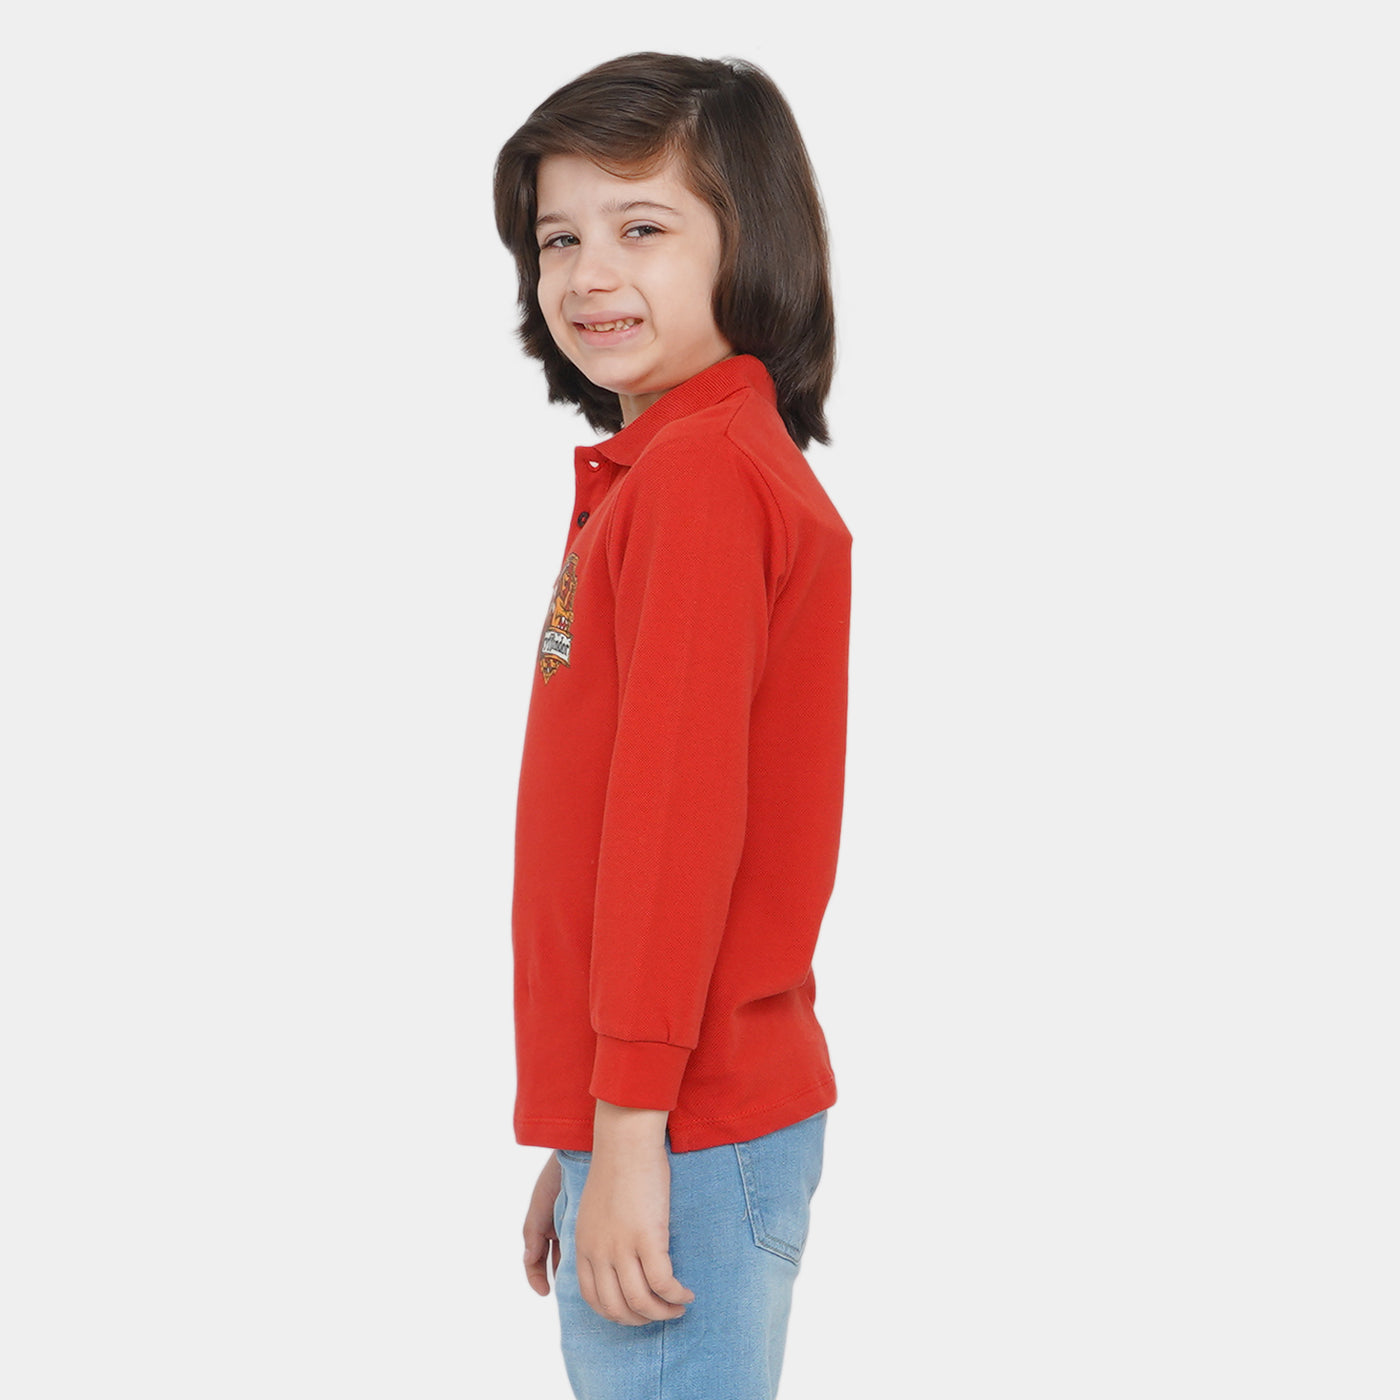 Boys Polo t-Shirt Gryffindor - Red